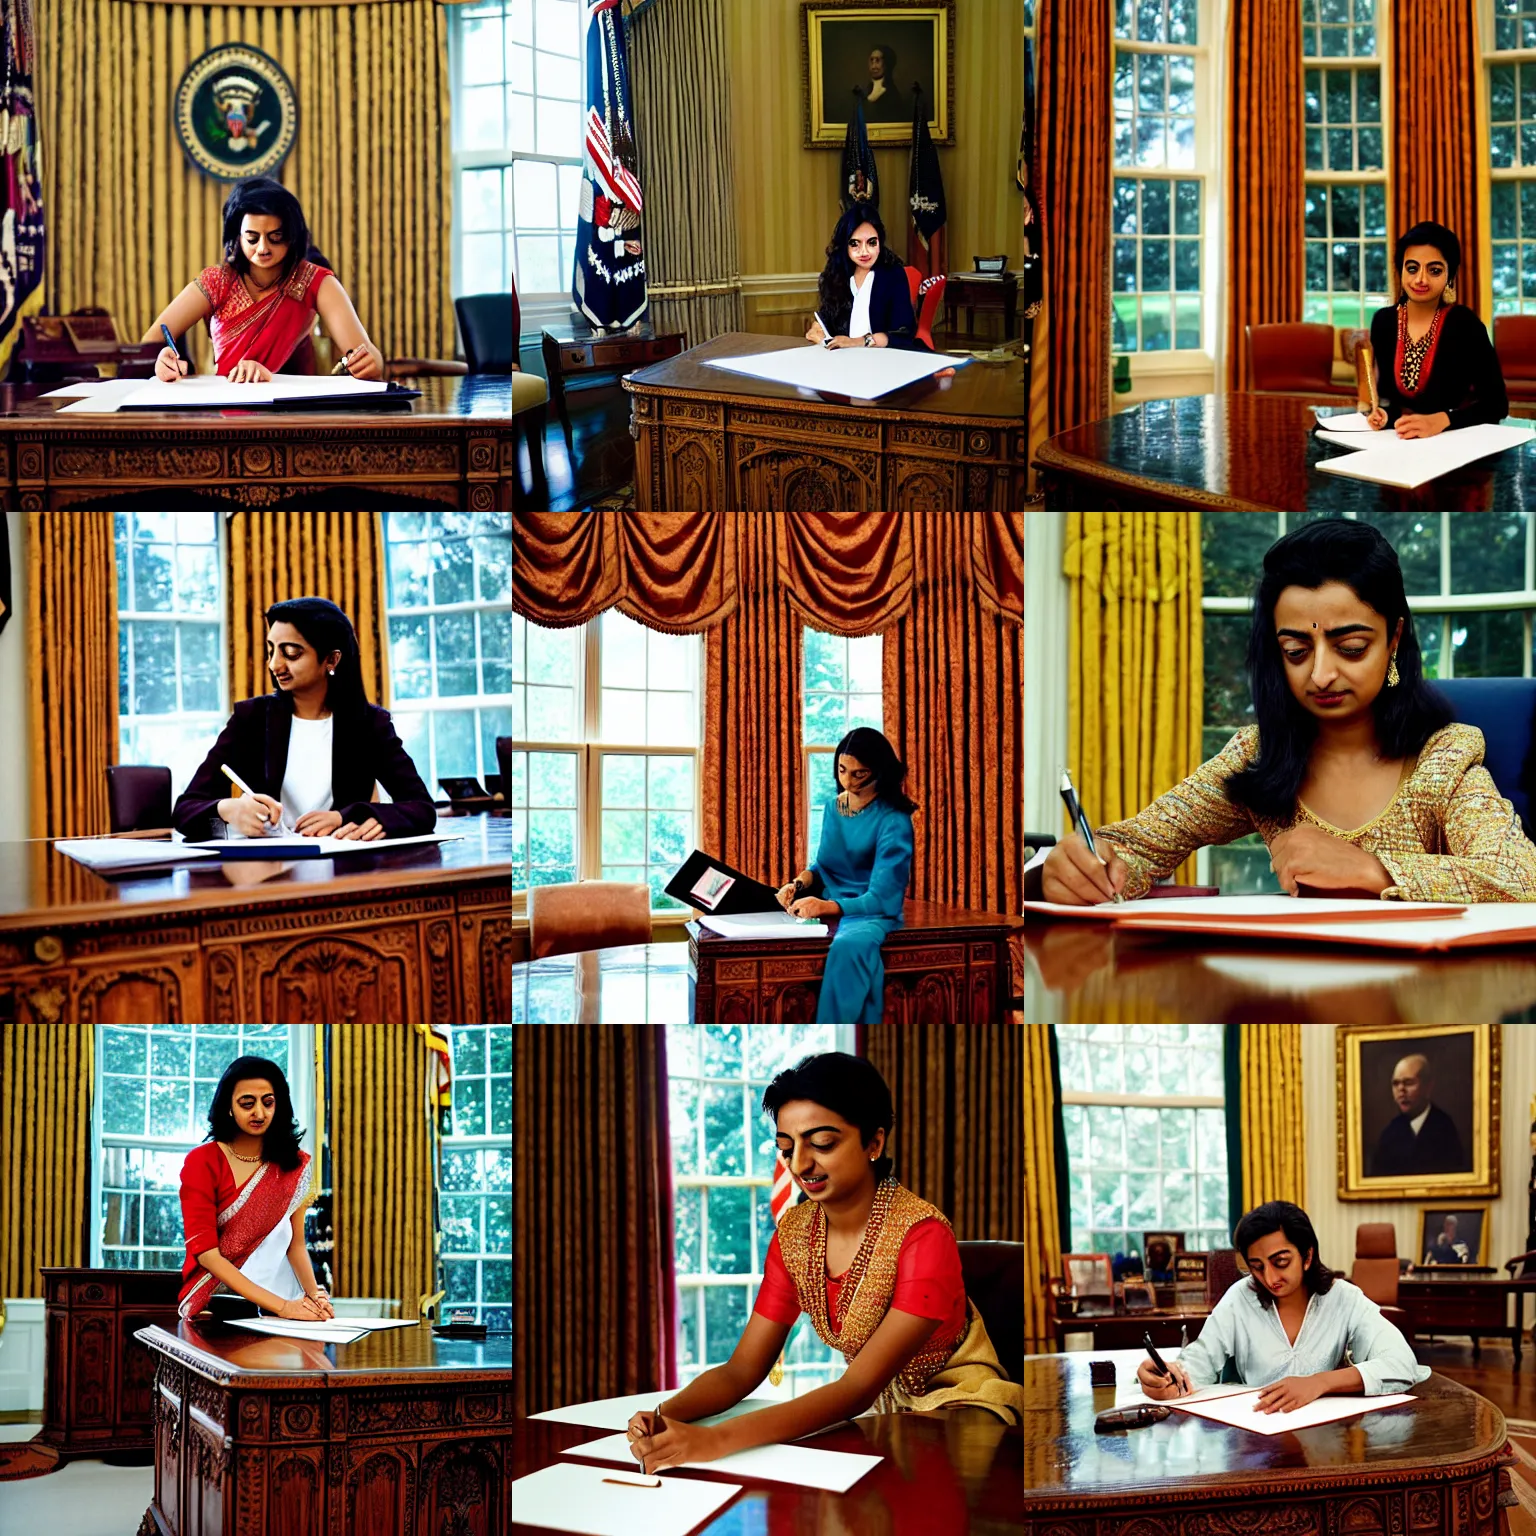 Prompt: Radhika Apte as President, signing a bill in the Oval Office, photo portrait by Steve McCurry